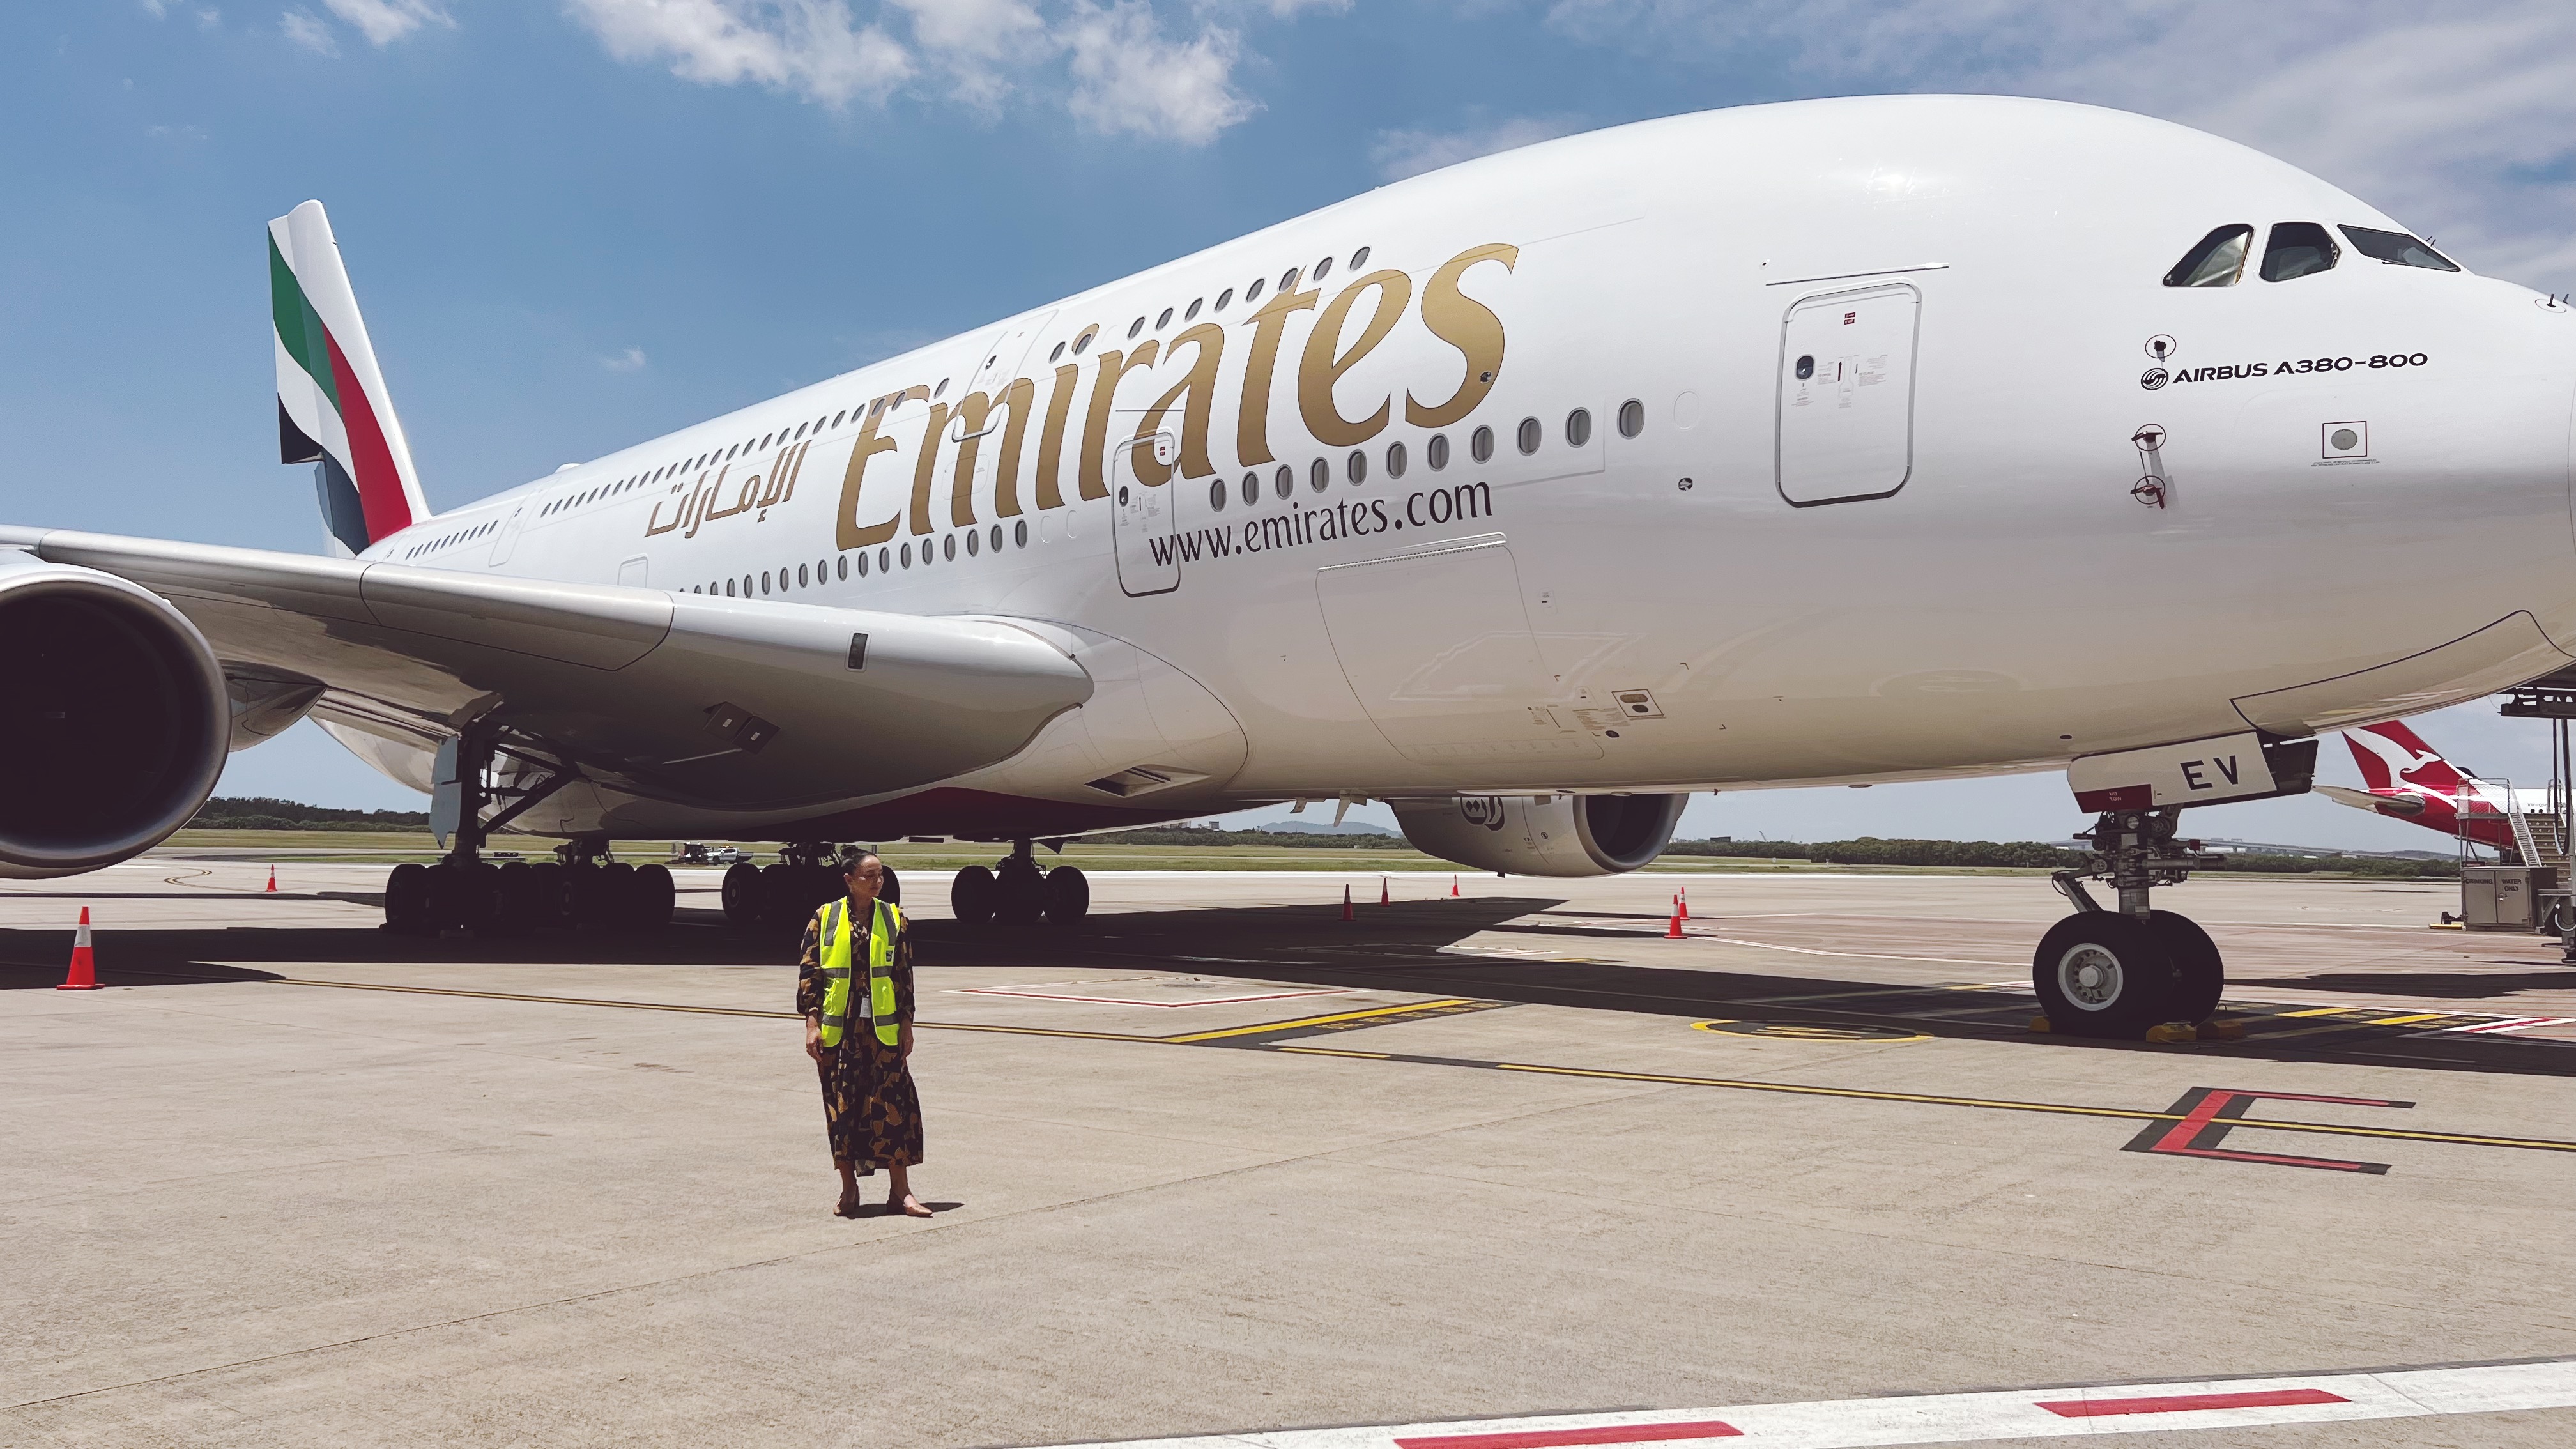 Lauren standing in front of the Emirates A380